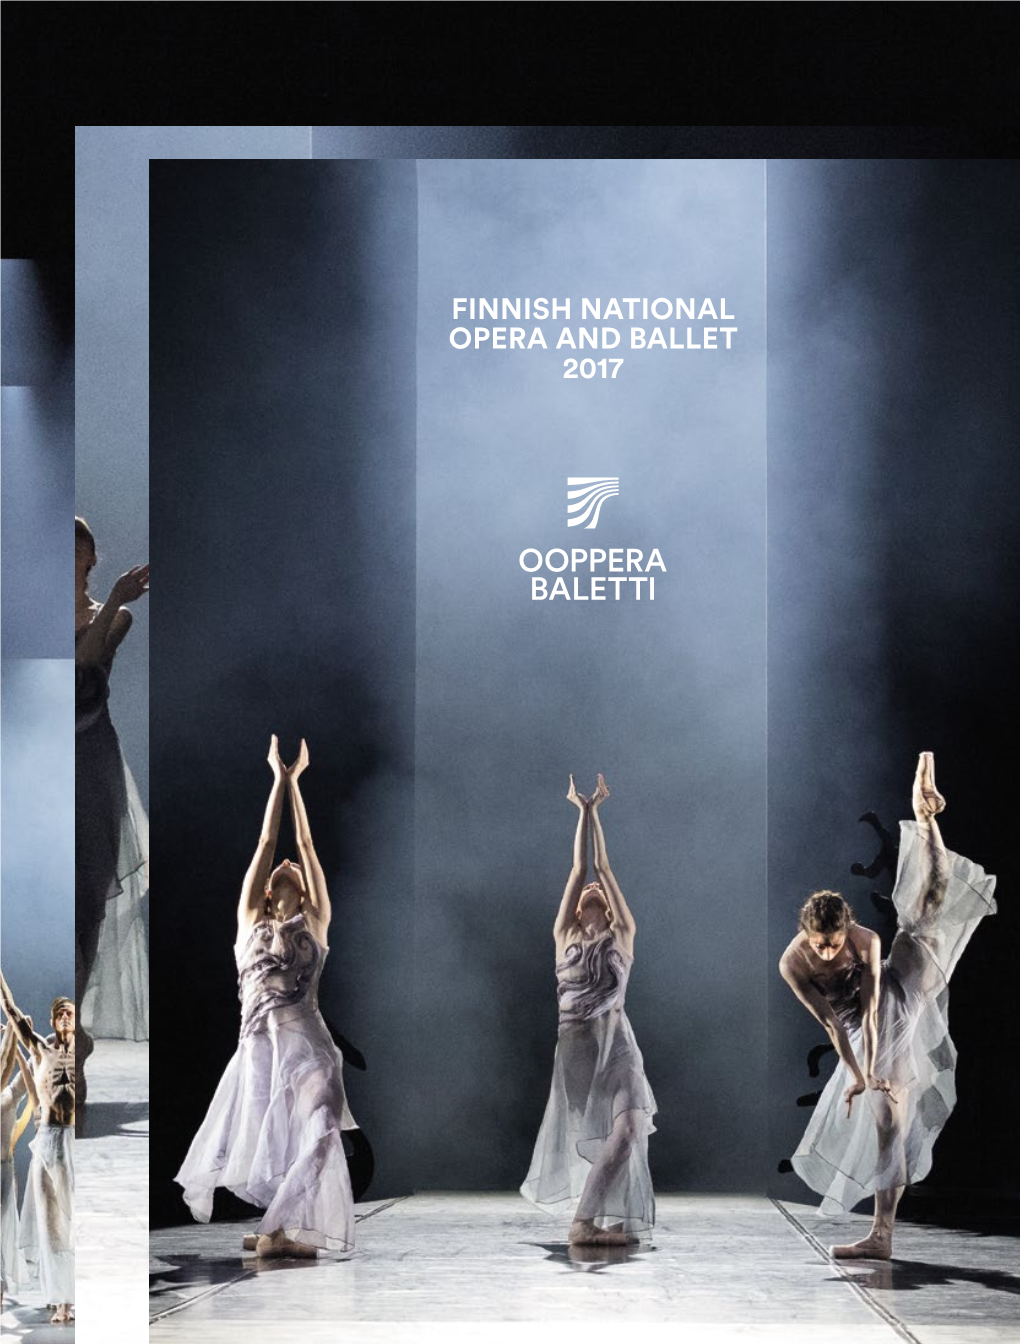 FINNISH NATIONAL OPERA and BALLET 2017 This Is a Shortened Version of the Annual Report 2017